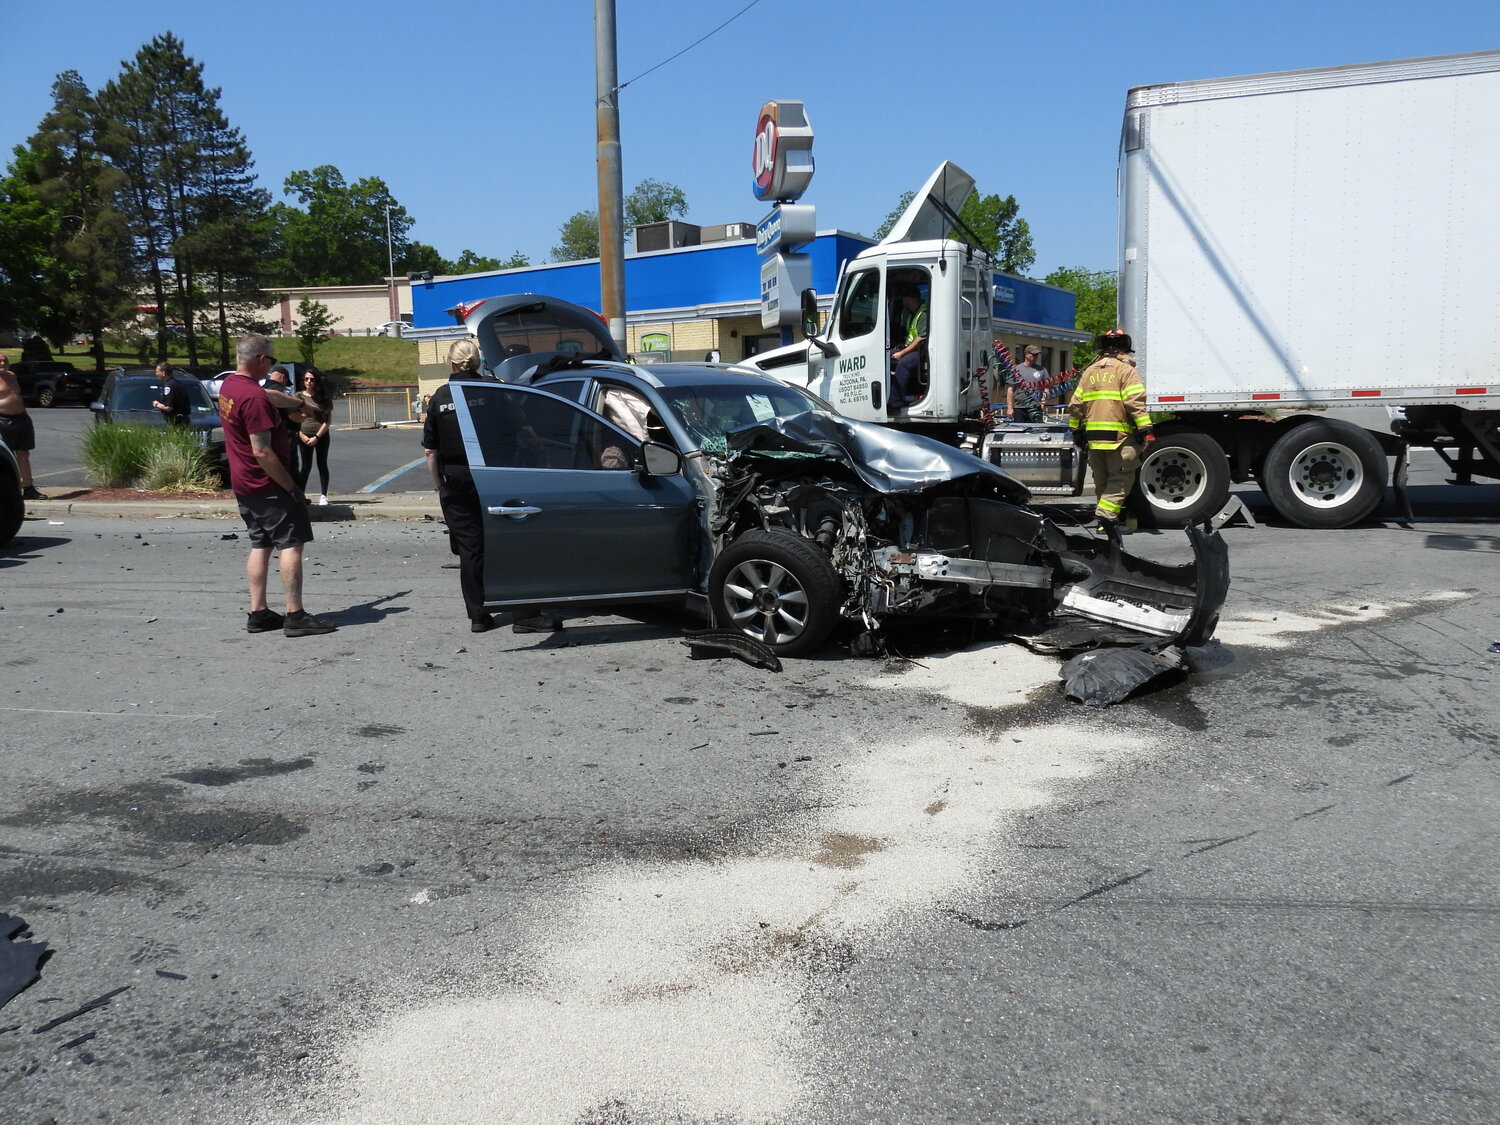 First responders were called to the scene of a motor vehicle accident Thursday, at the intersection of Route 300 and 52 in the Town of Newburgh.